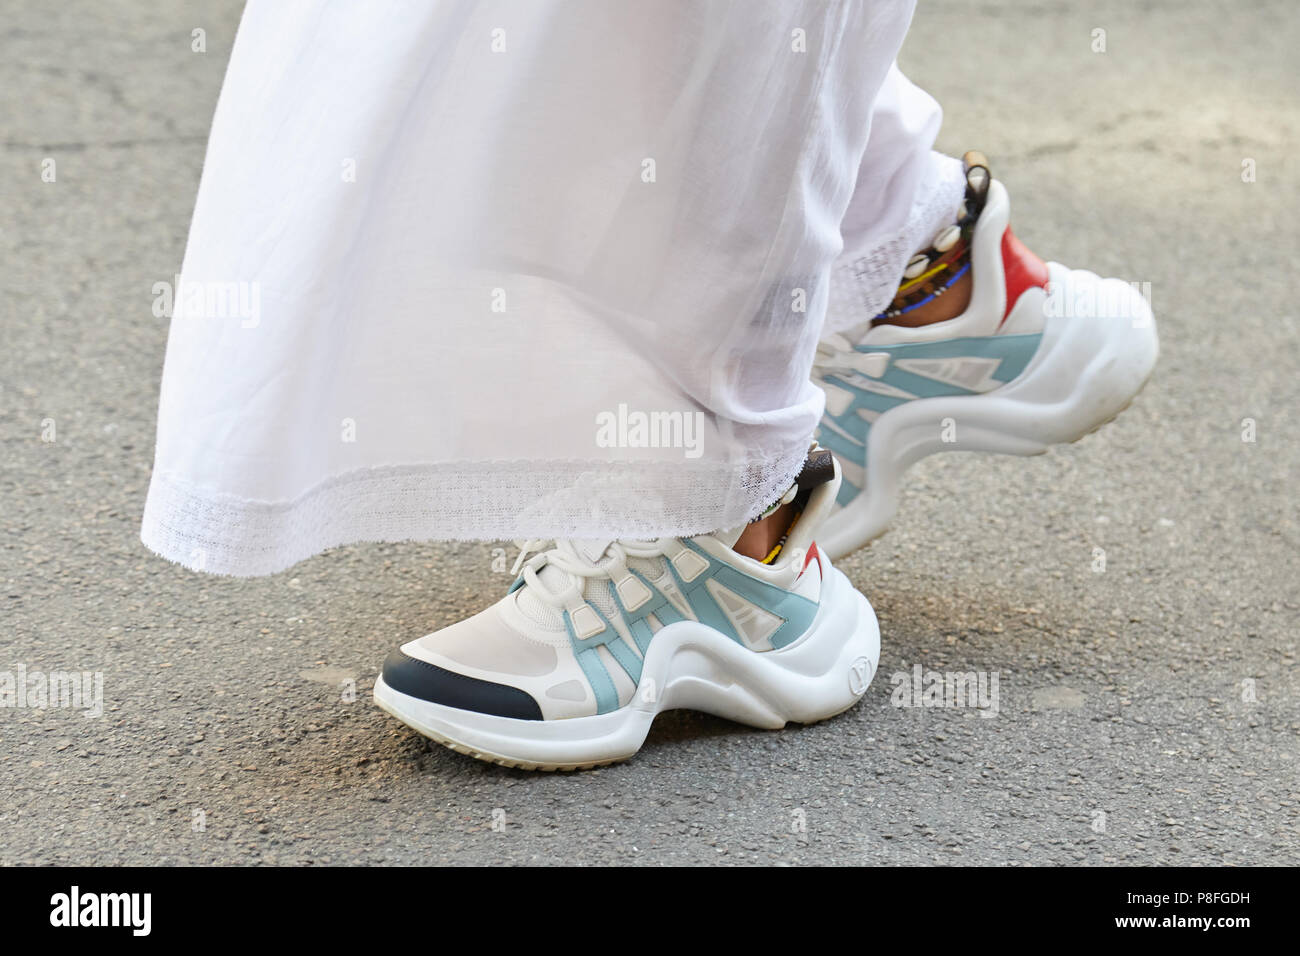 louis vuitton sees trainers as white canvas at milan fashion week